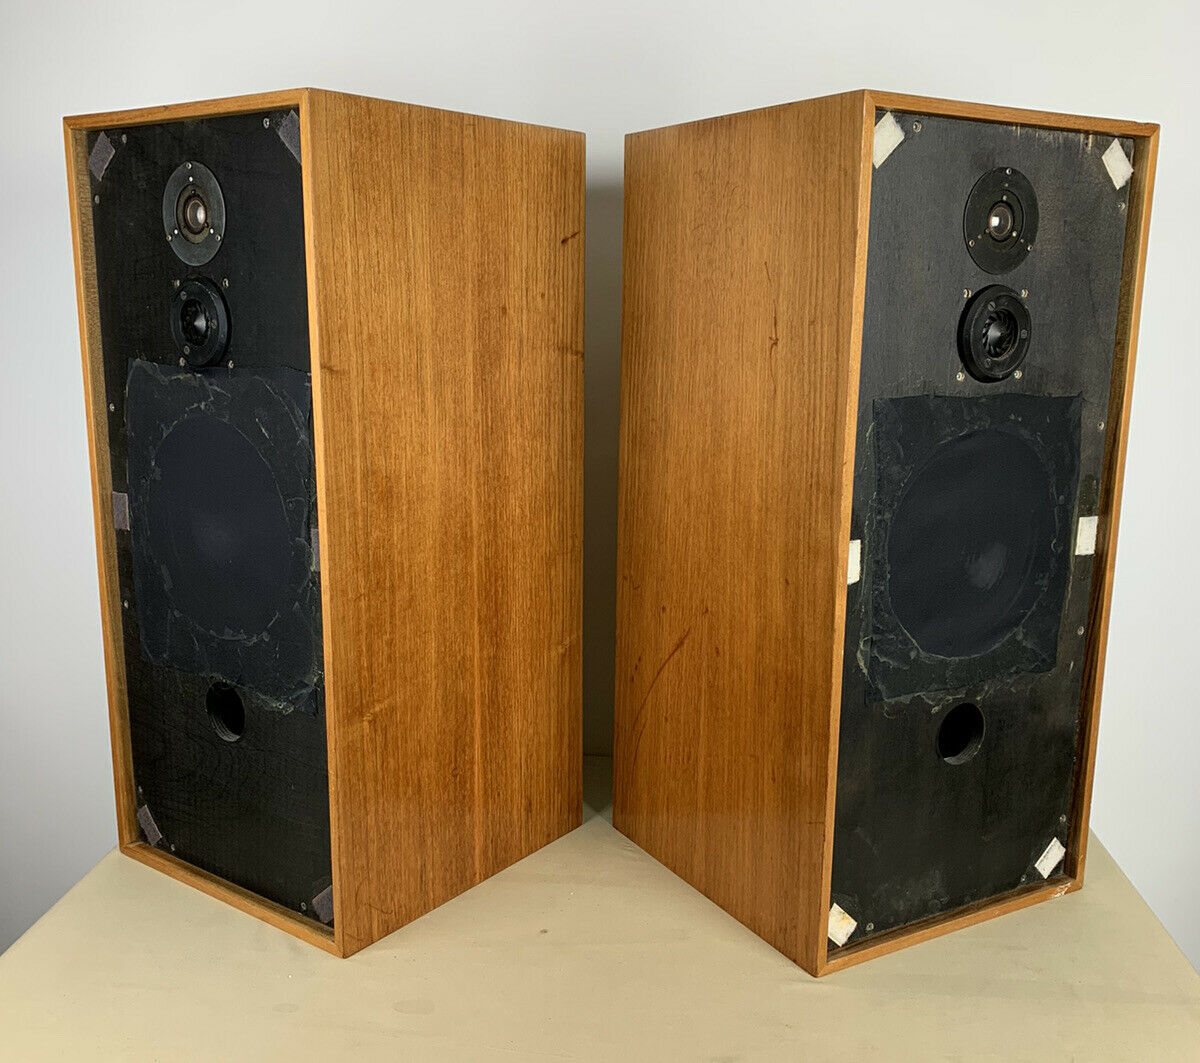 VINTAGE SPENDOR TYPE BCII SPEAKERS MONITOR - RARE BEAUTY – The